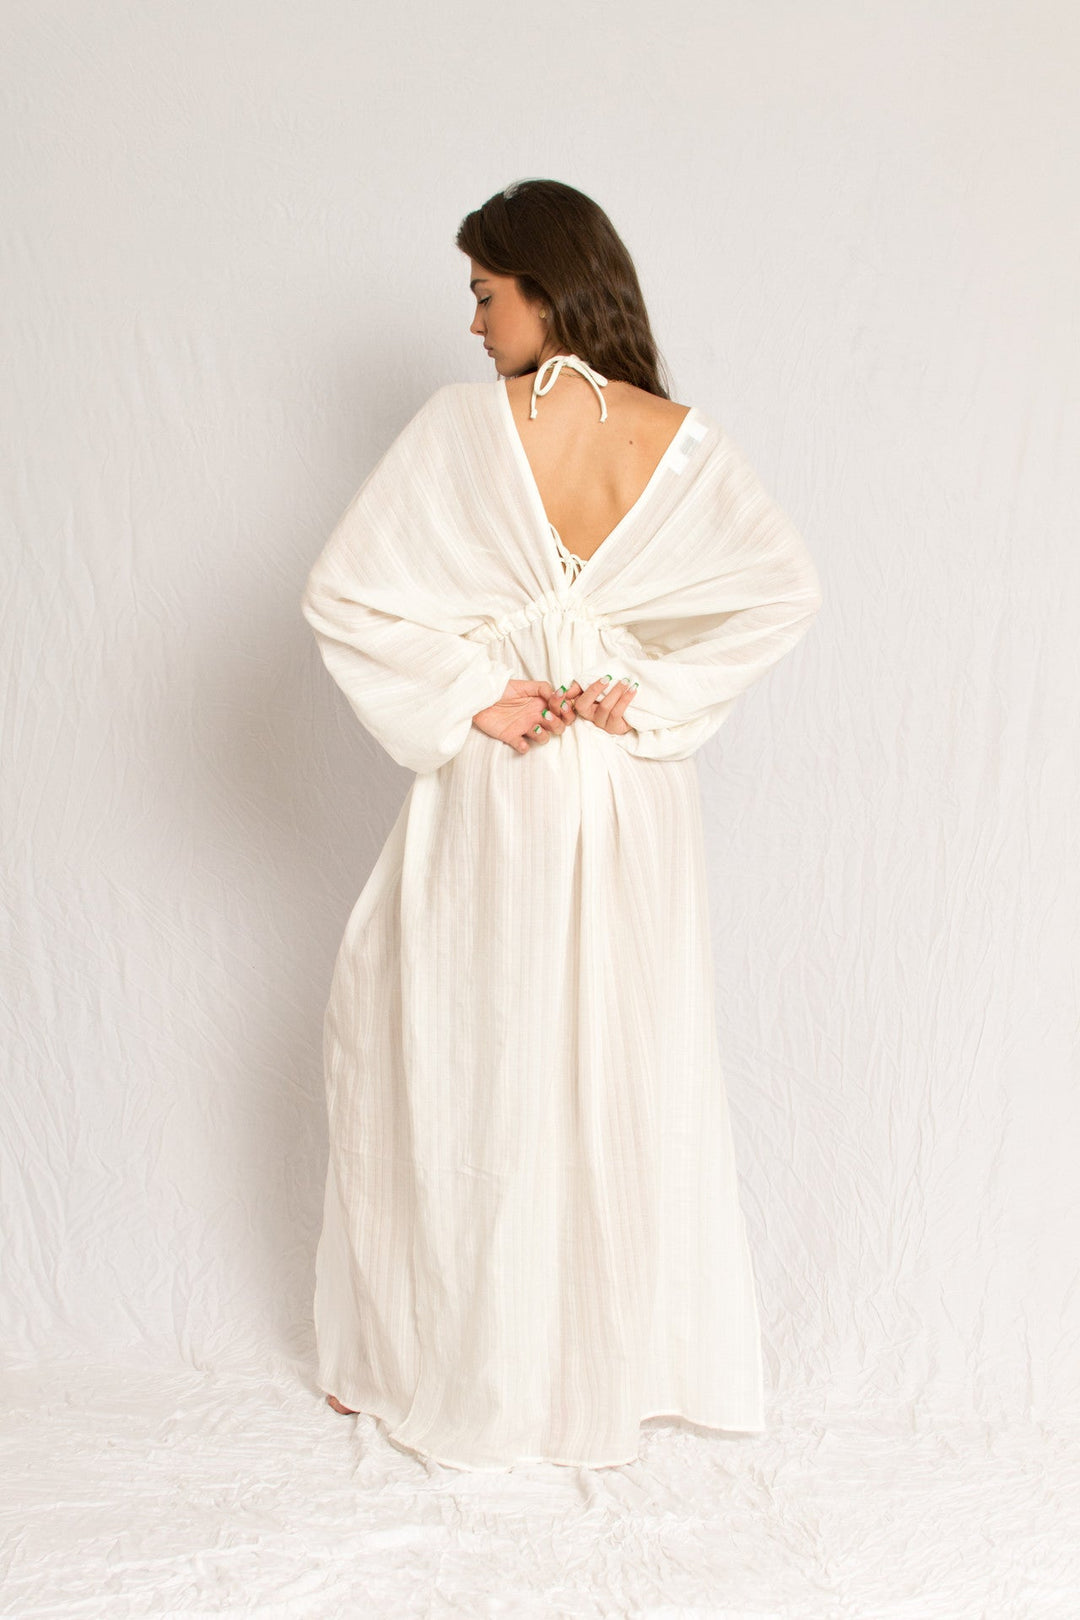 White caftan maxi beach dress with V neckline and middle slit